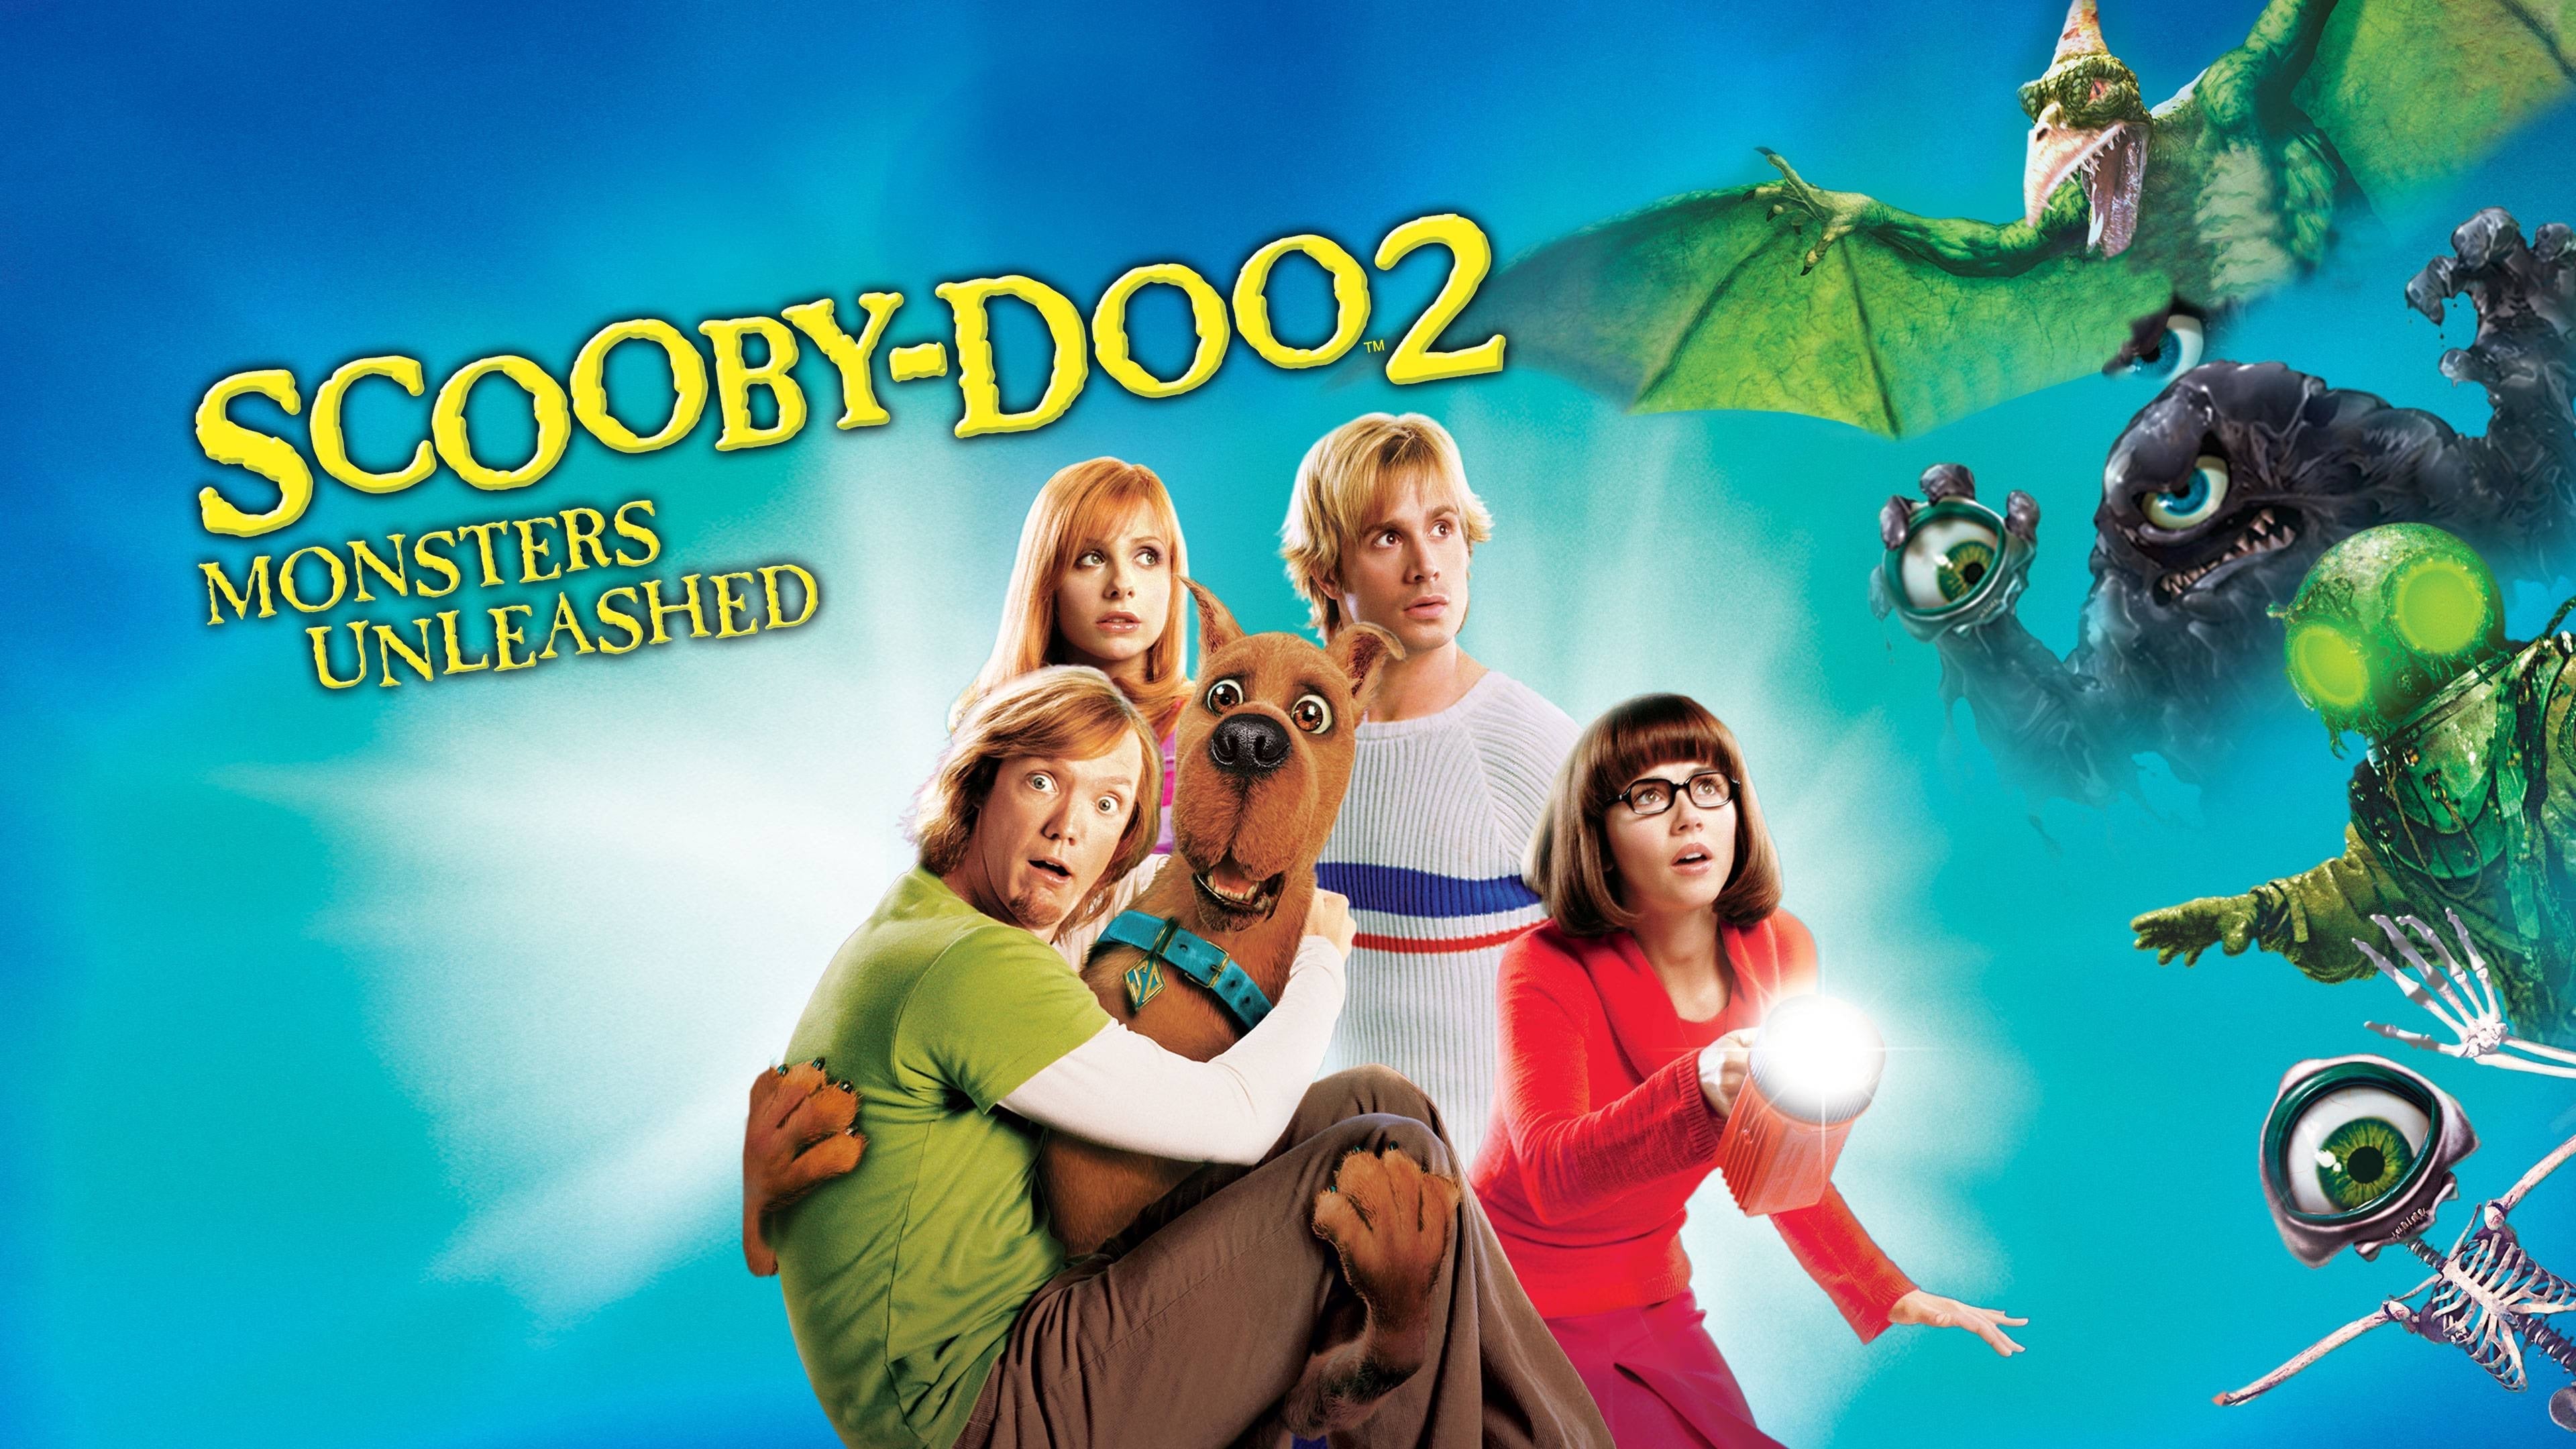 Scooby-Doo 2: Monsters Unleashed Photos.